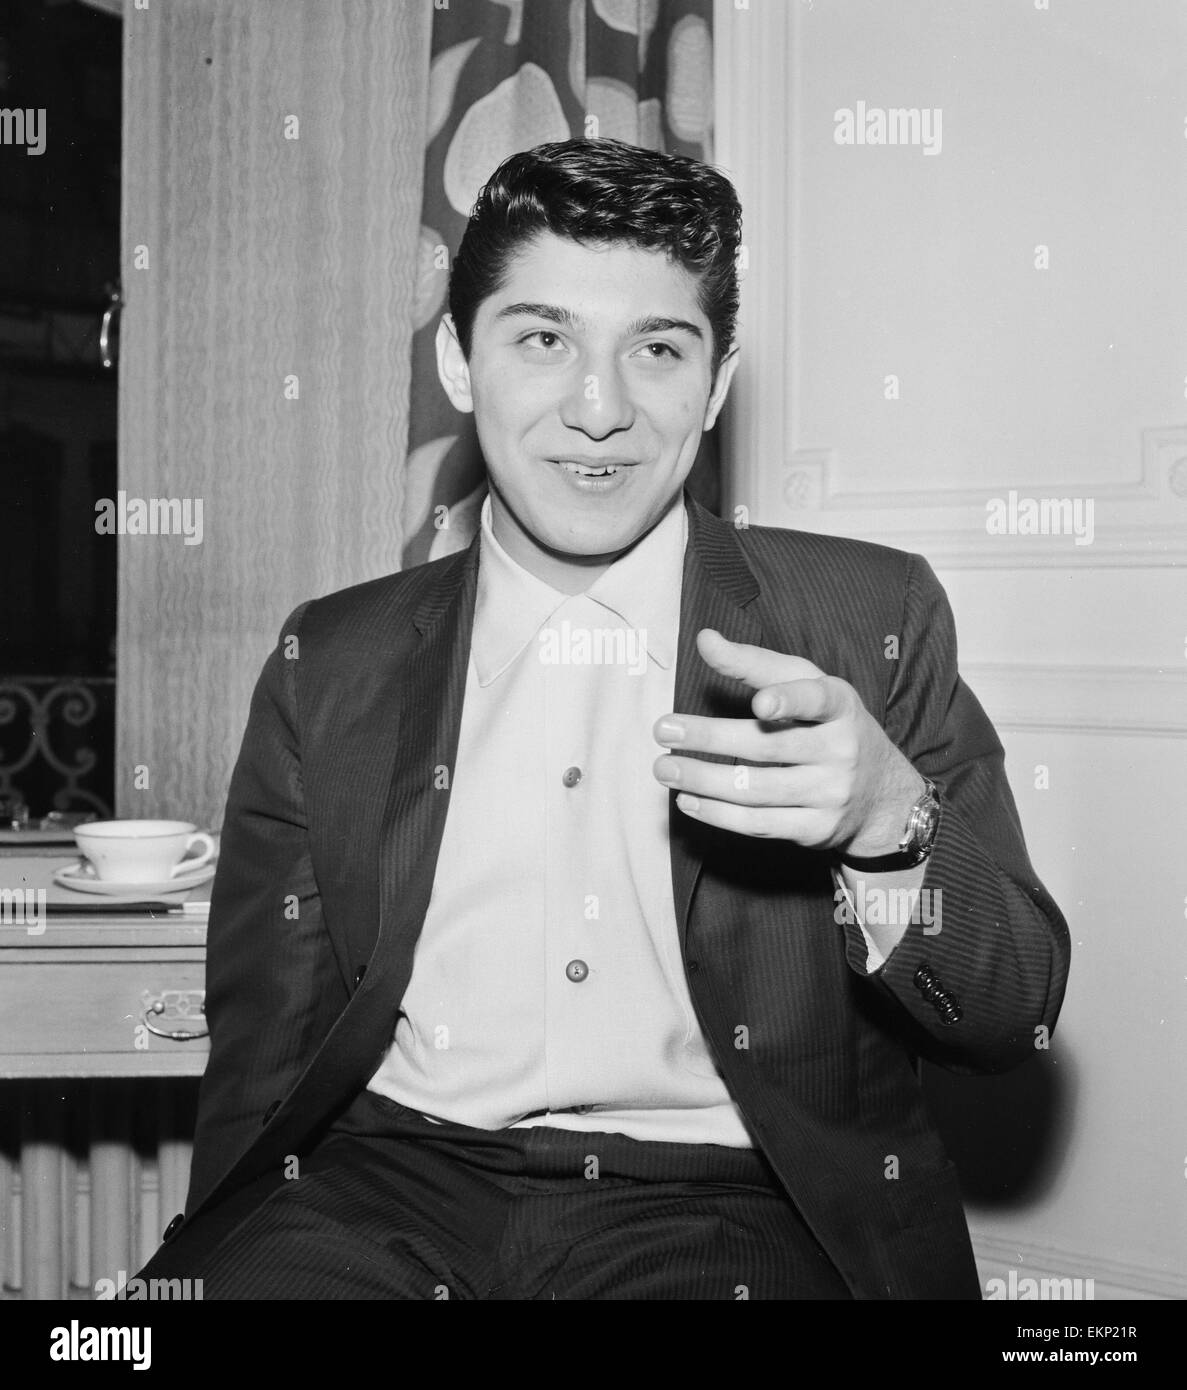 Canadian singer songwriter Paul Anka pictured in his suite at the Savoy Hotel in London during his visit to Britain. 20th January 1959. Stock Photo